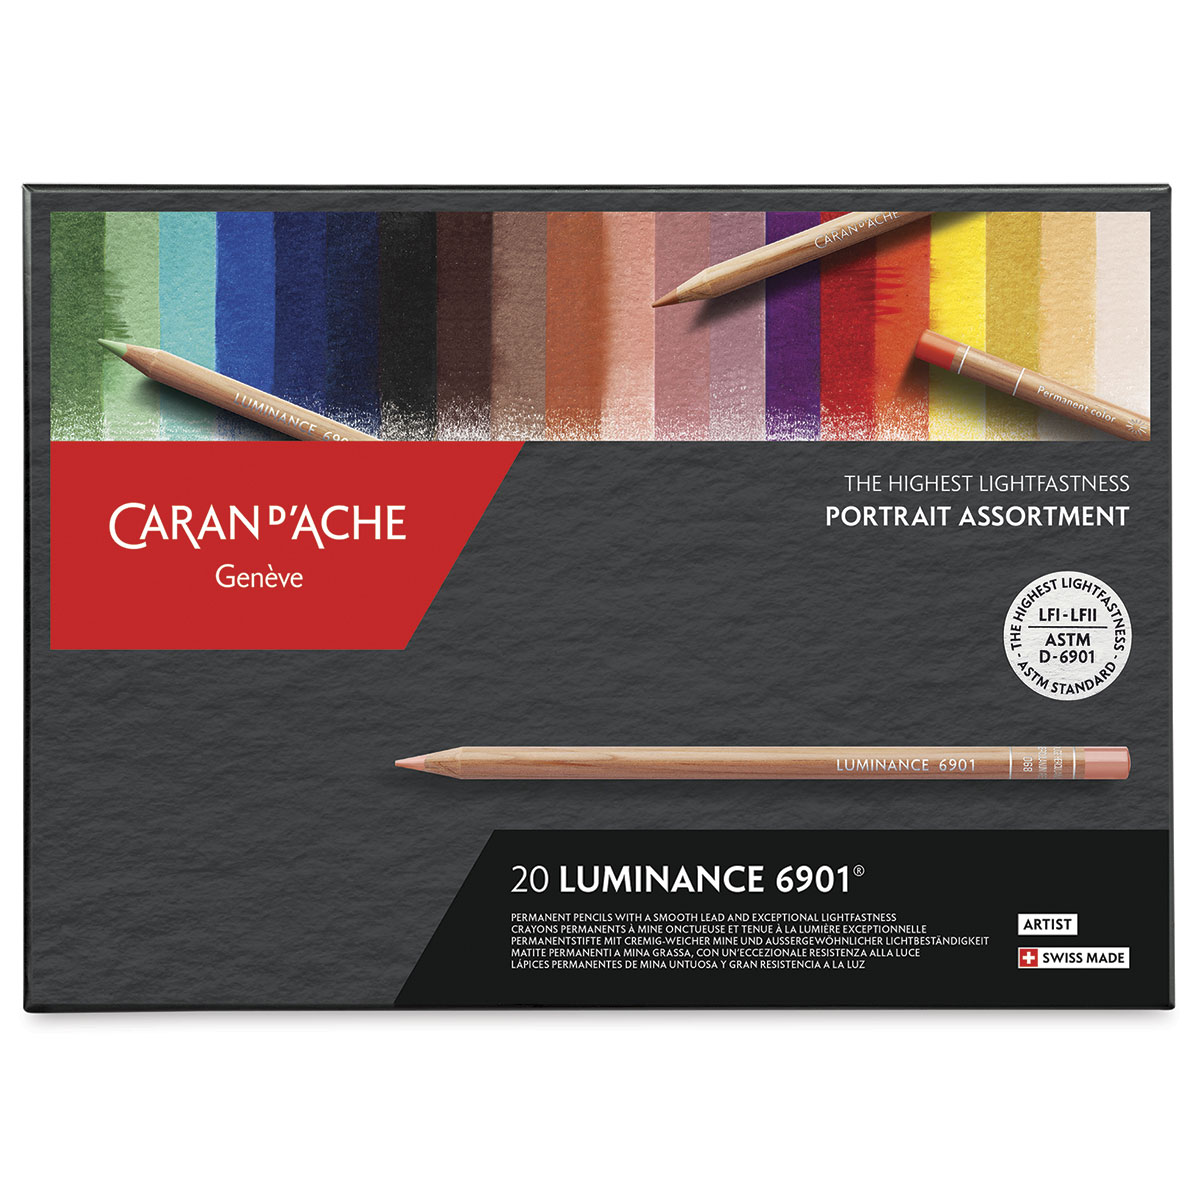 Caran D'Ache Luminance Colored Pencils Review for Adult Coloring